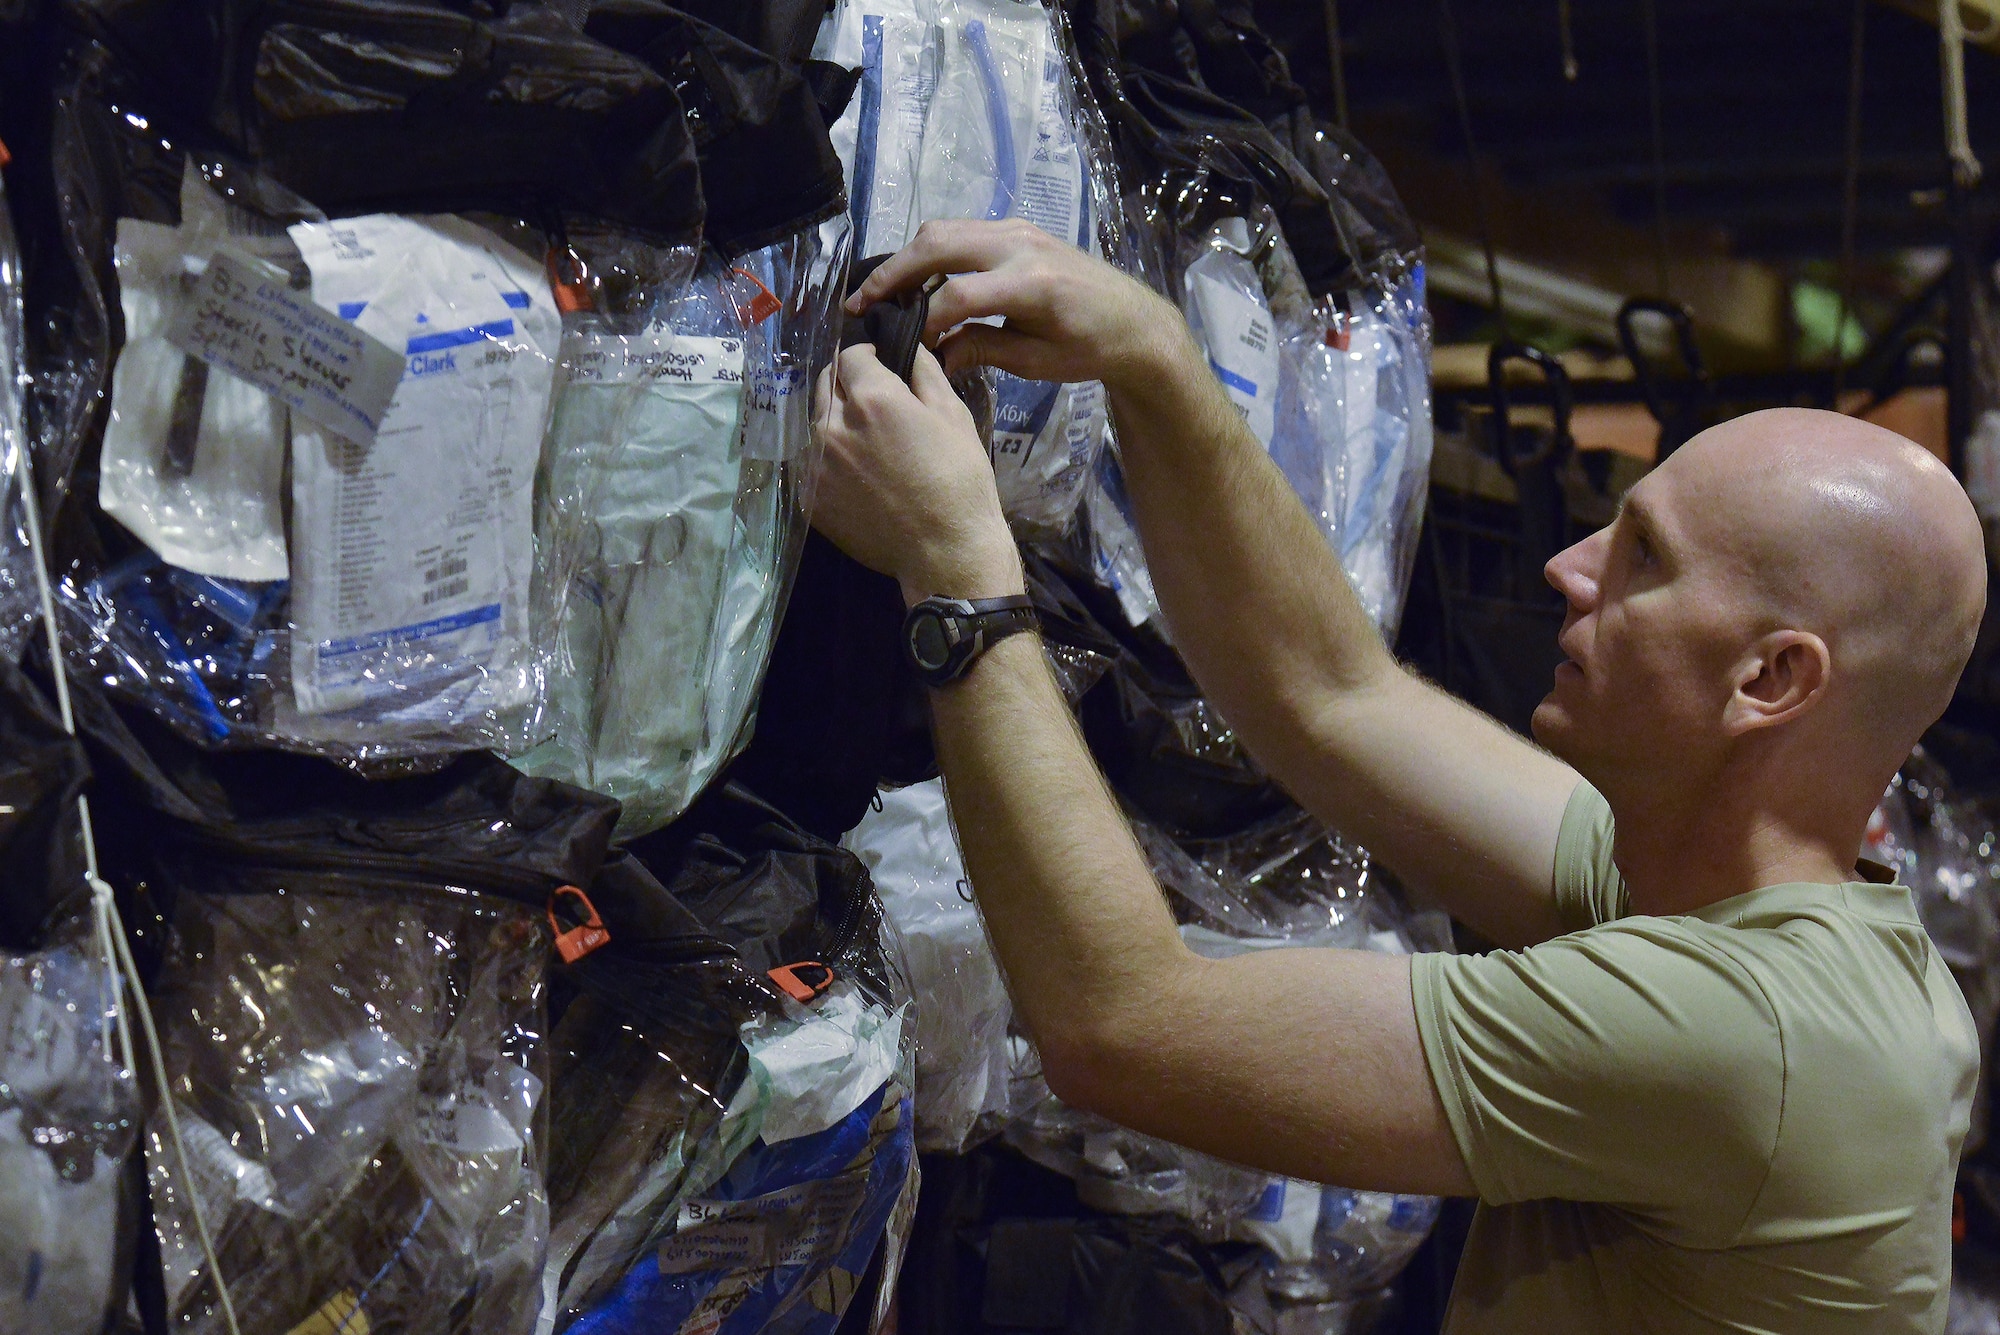 Capt. Brandon Trappett, 379th Expeditionary Medical Group Mobile Field Surgical Team, searches for the correct medical supplies for his team to complete a timed setup and equipment familiarization training August 28, 2015 at Al Udeid Air Base, Qatar. (U.S. Air Force photo/Staff Sgt. Alexandre Montes)